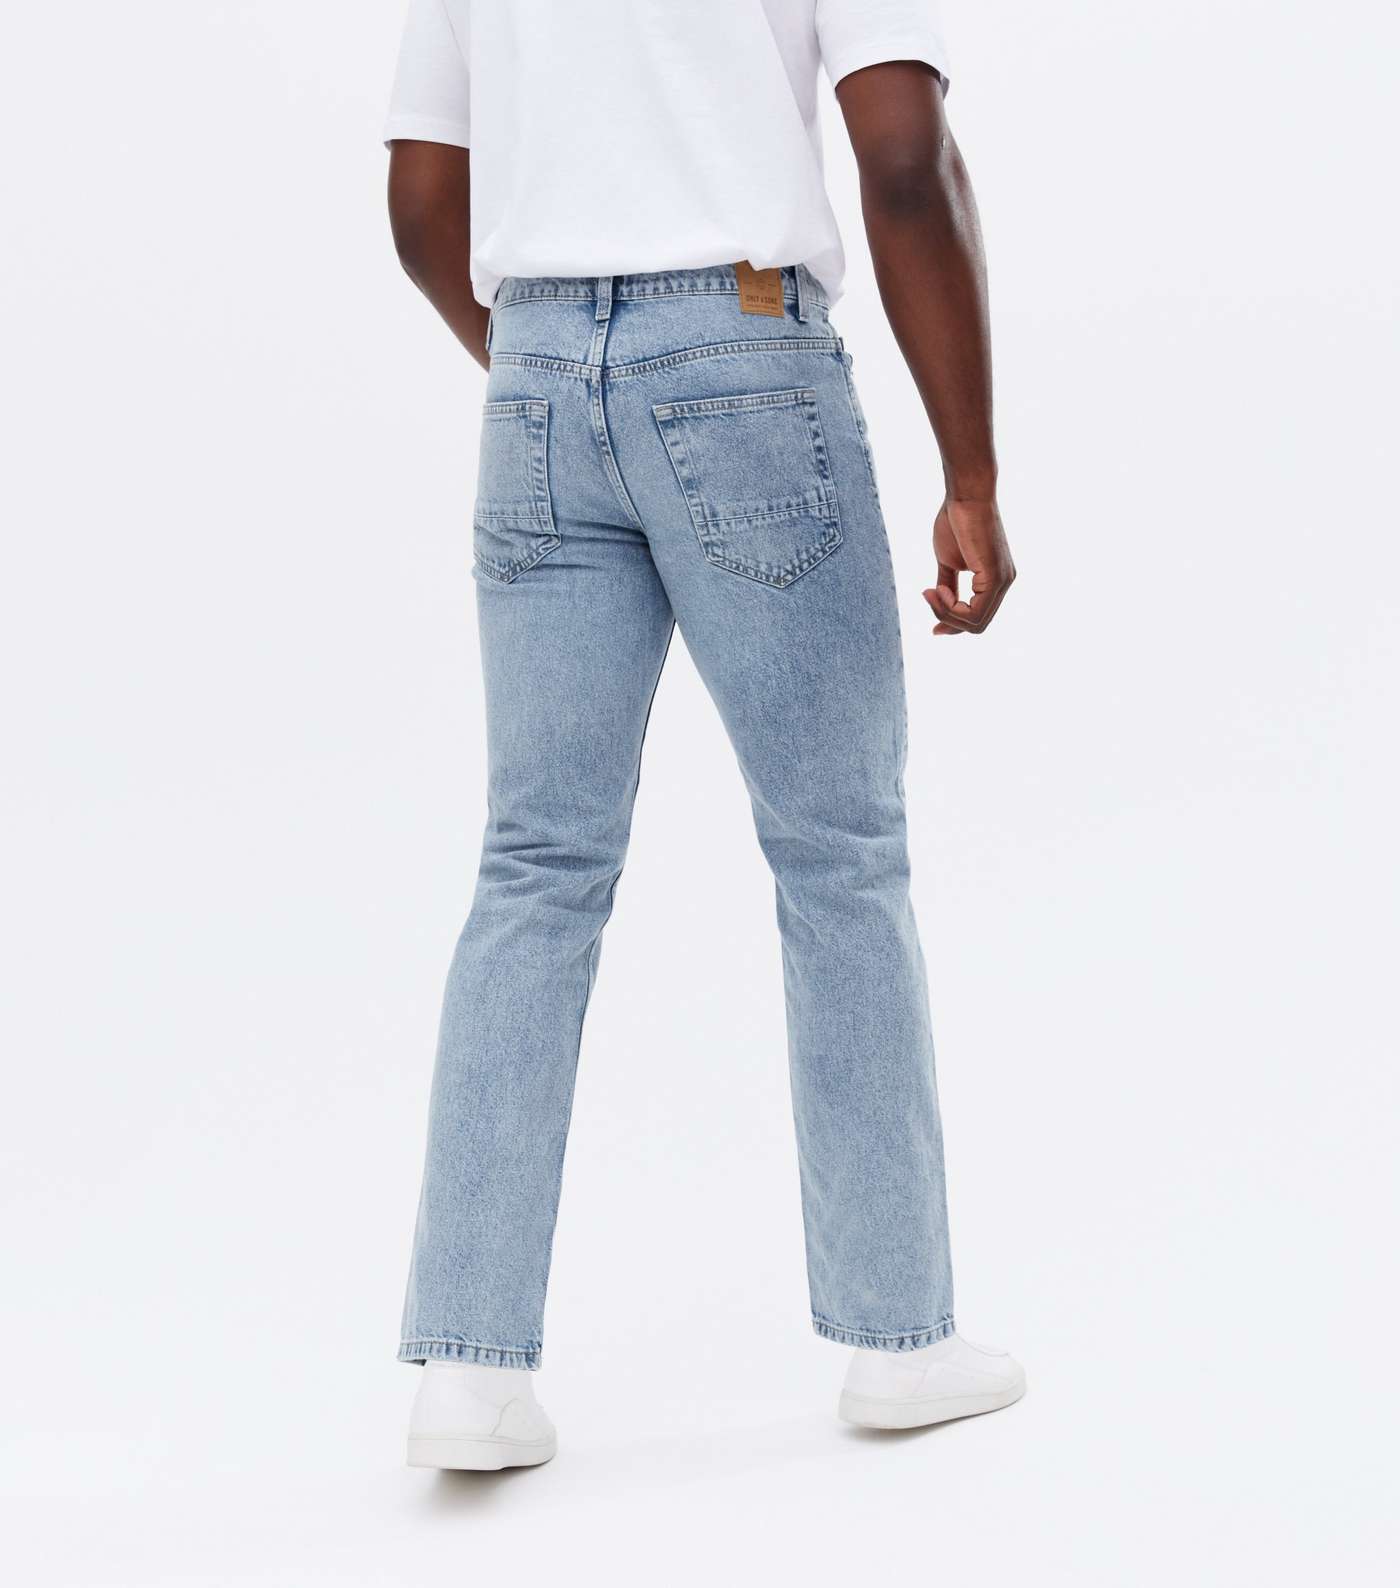 Only & Sons Blue Light Wash Straight Fit Jeans Image 4